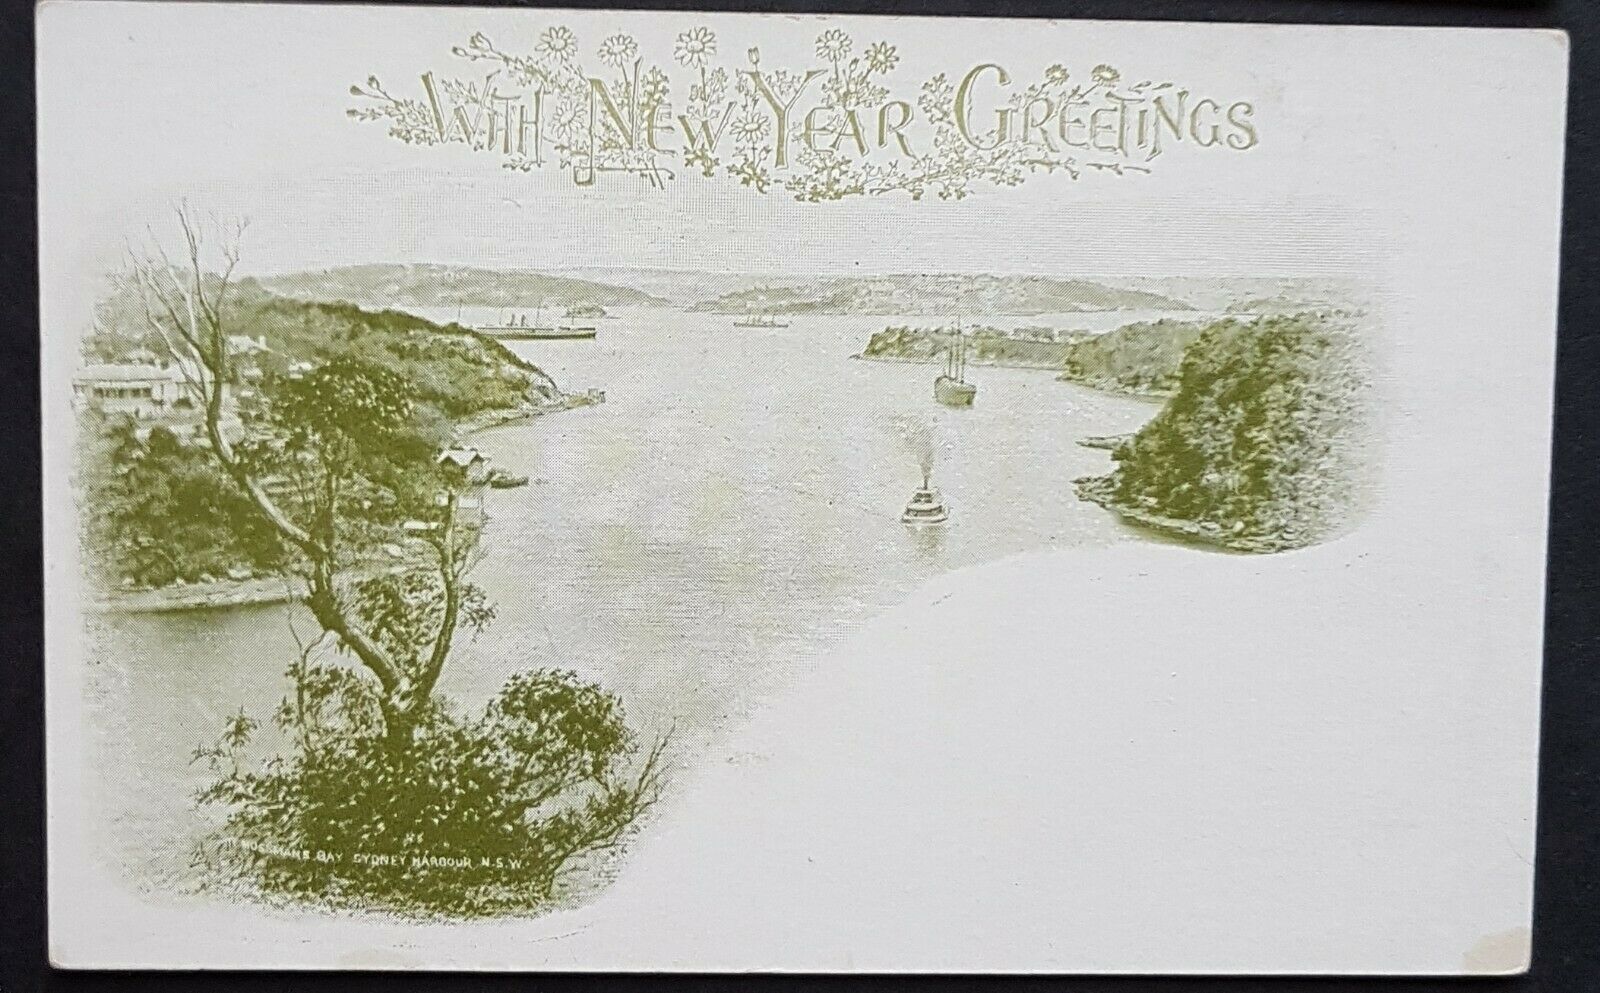 NSW 1d Arms Post Card New Year Greetings Mossmans Bay Sydney Harbour HG 19c mint